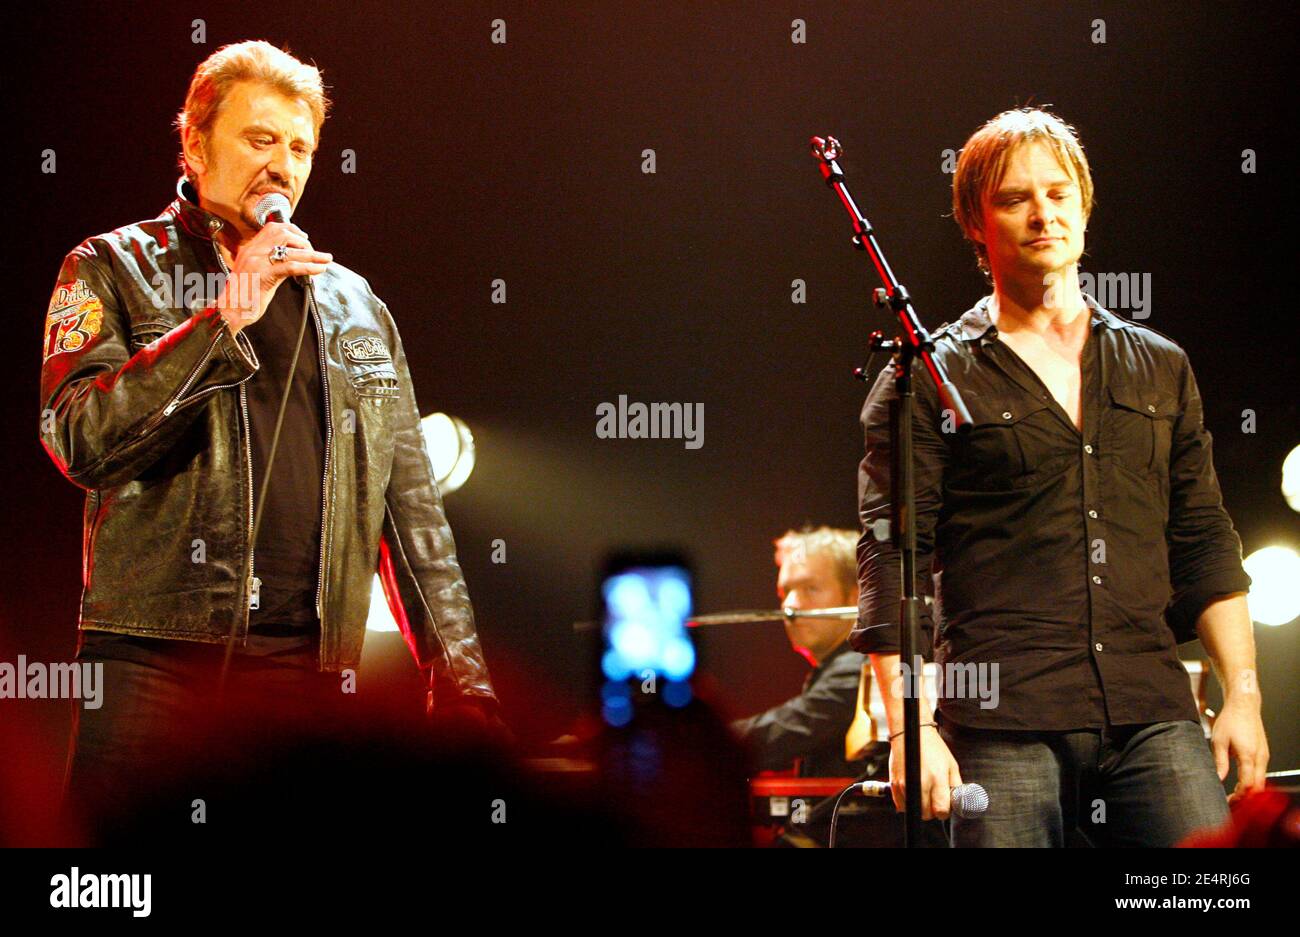 File photo : David Hallyday and his father Johnny Hallyday on stage at the Cigale in Paris on March 17, 2008. France's biggest rock star Johnny Hallyday has died from lung cancer, his wife says. He was 74. The singer - real name Jean-Philippe Smet - sold about 100 million records and starred in a number of films. Photo by Marco Vitchi/ABACAPRESS.COM Stock Photo